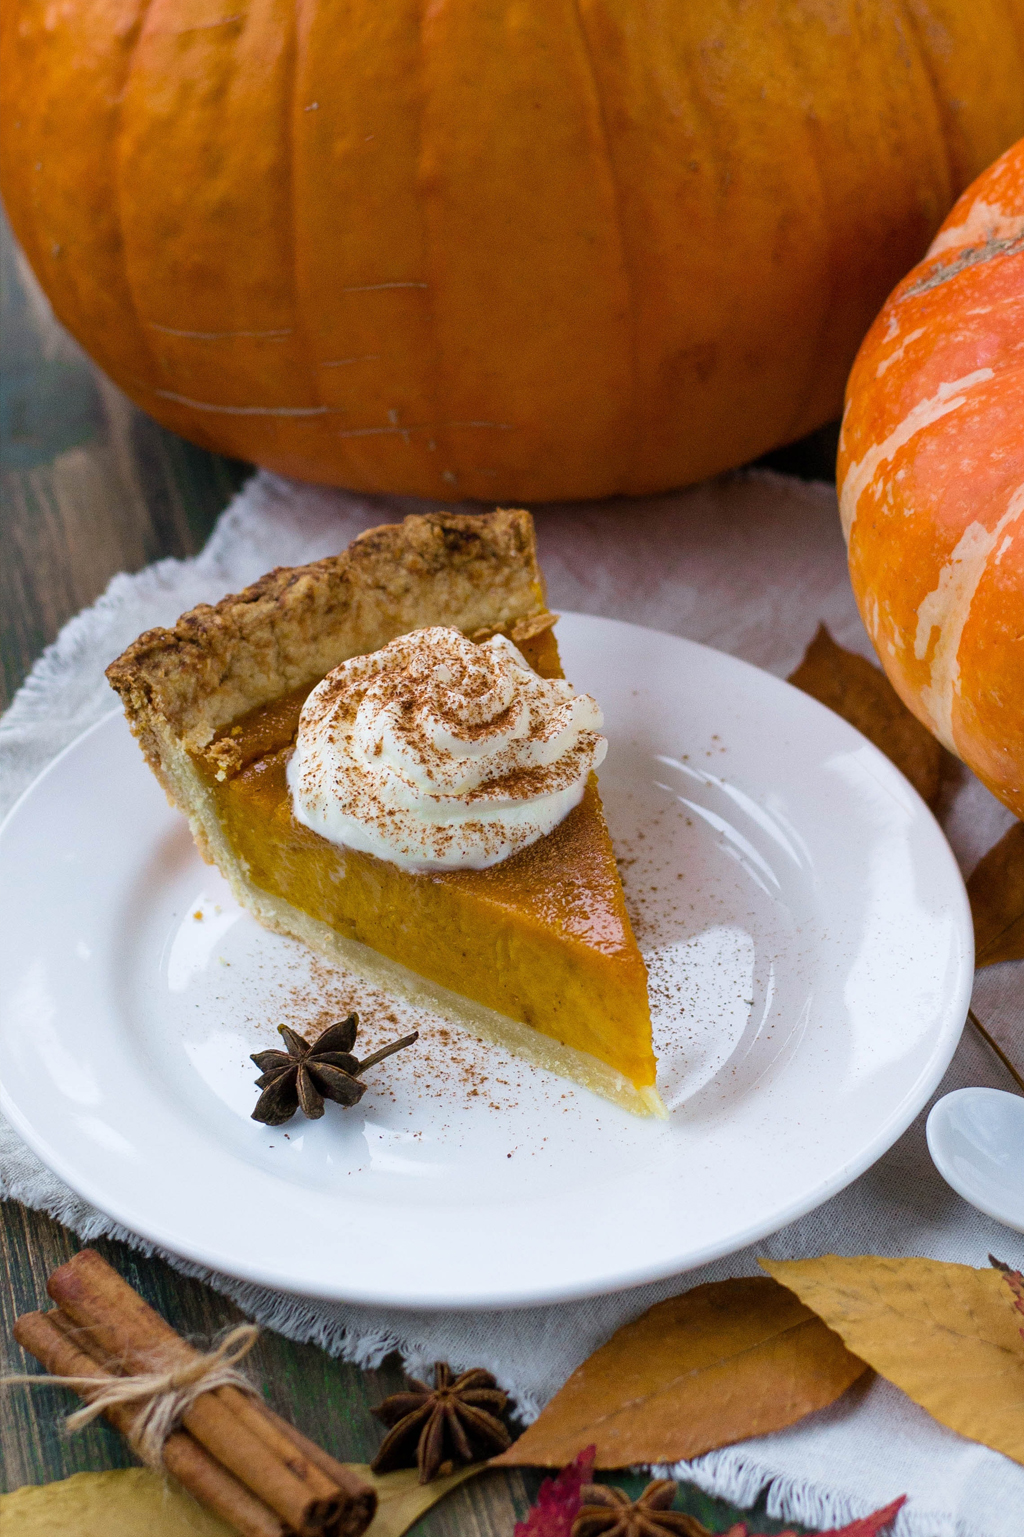 Slice of pumpkin pie with dollop of whipped cream, surrounded by pumpkins and fall decor